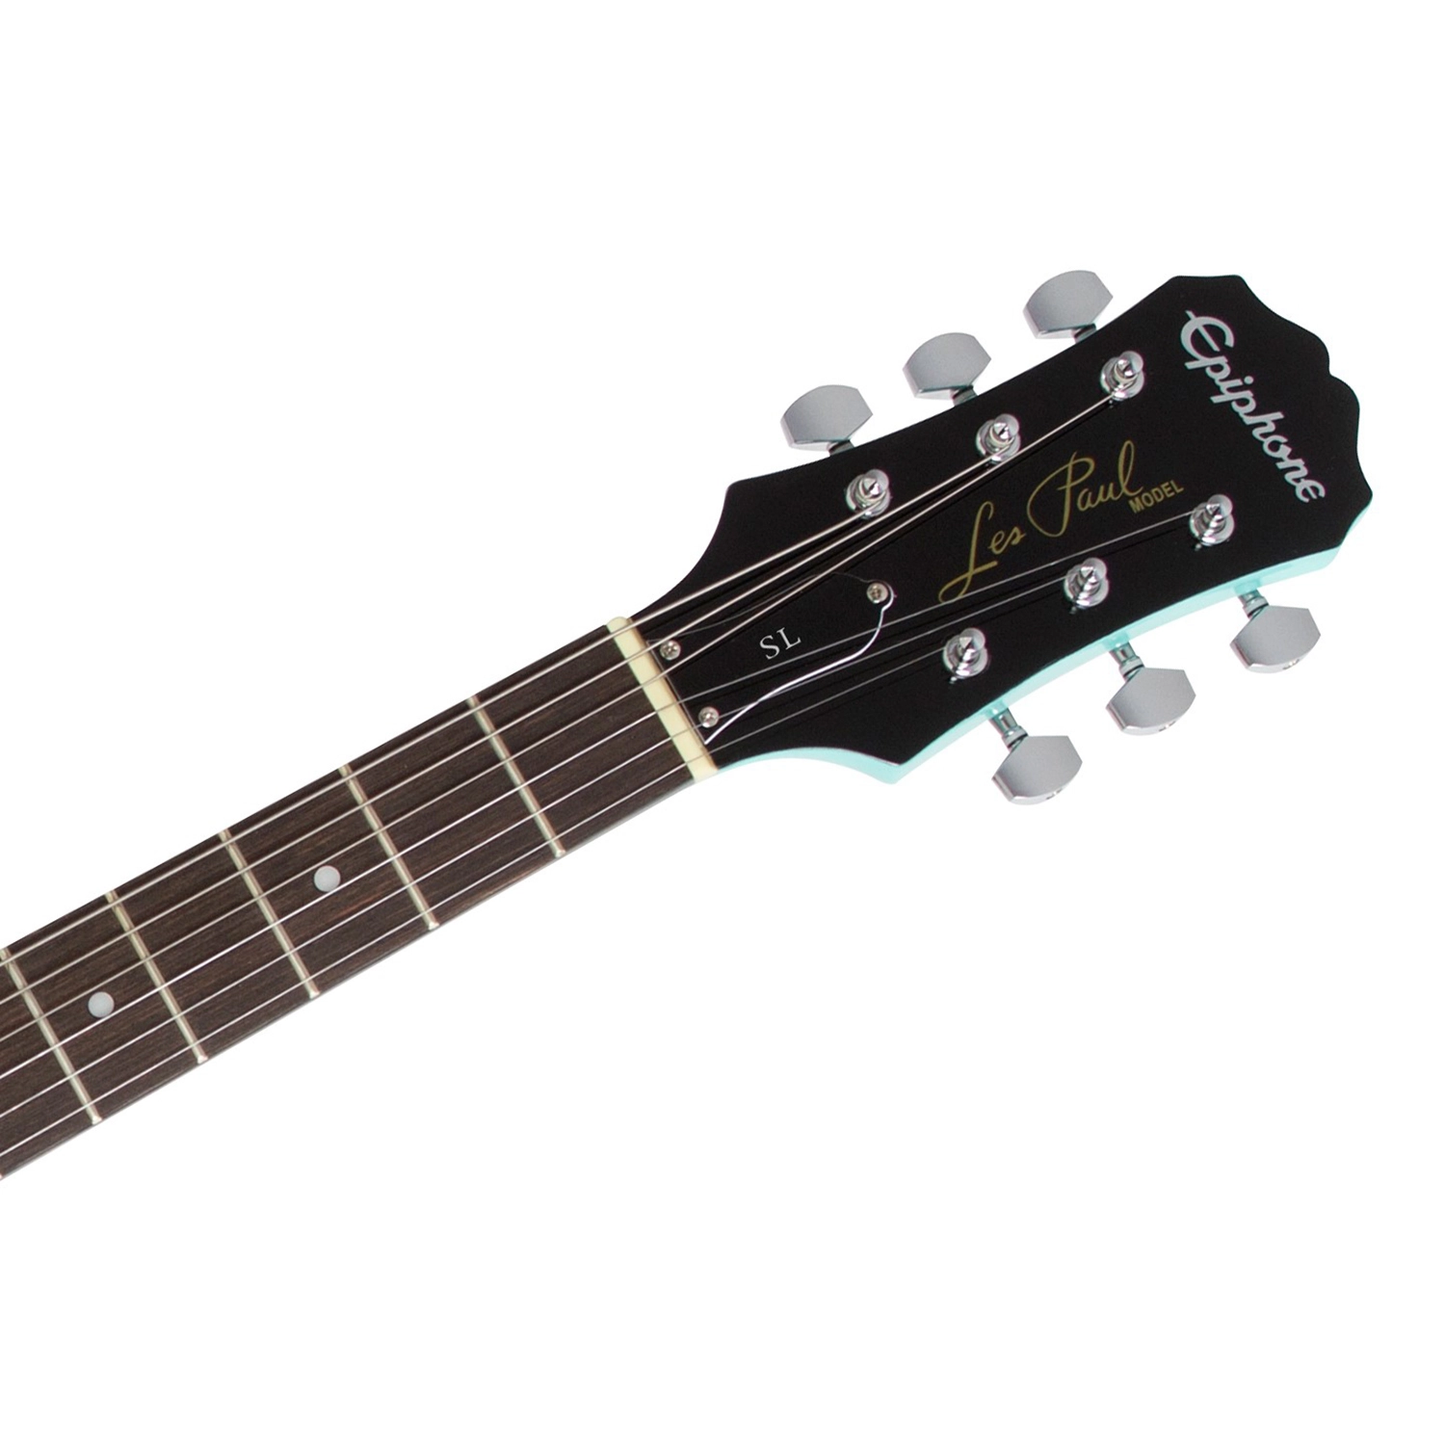 Epiphone Les Paul SL Melody Maker 22-Fret Ceramic SS Electric Guitar with Gloss Finish (Turqouise) | ENOLTQCH1-GC